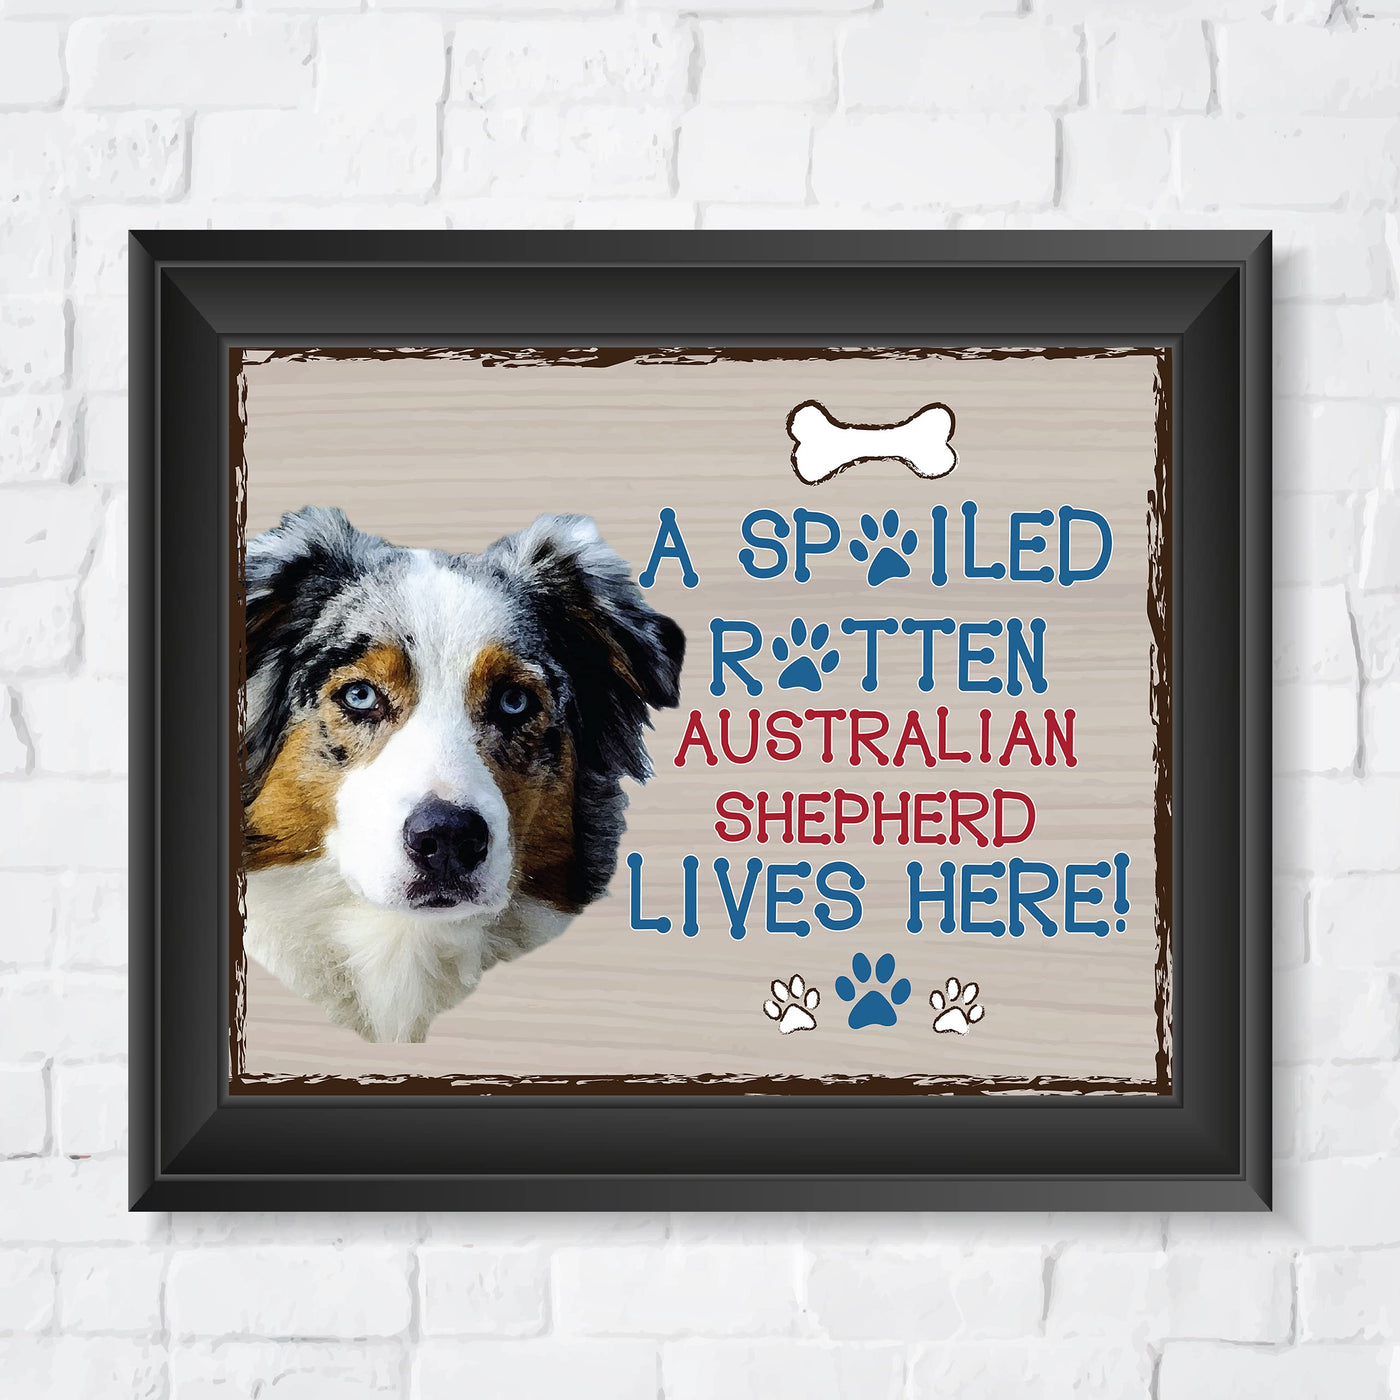 Australian Shepherd-Dog Poster Print-10 x 8" Wall Decor Sign-Ready To Frame."A Spoiled Rotten Australian Shepherd Lives Here". Perfect Pet Wall Art for Home-Kitchen-Cave-Garage. Gift for Aussie Fans!